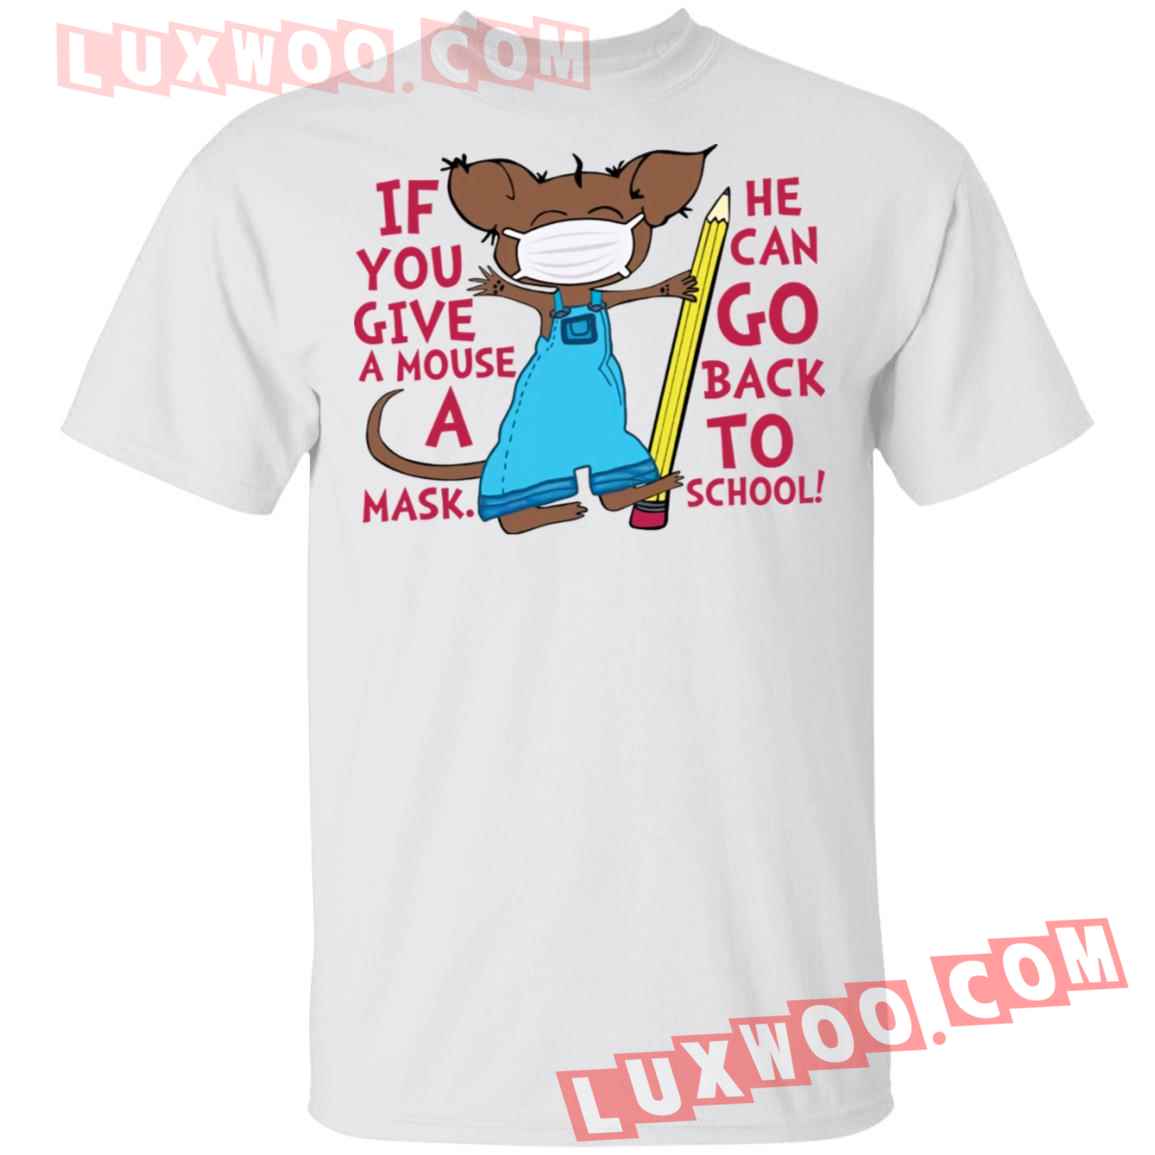 If You Give A Mouse A Mask He Can Go Back To School Shirt